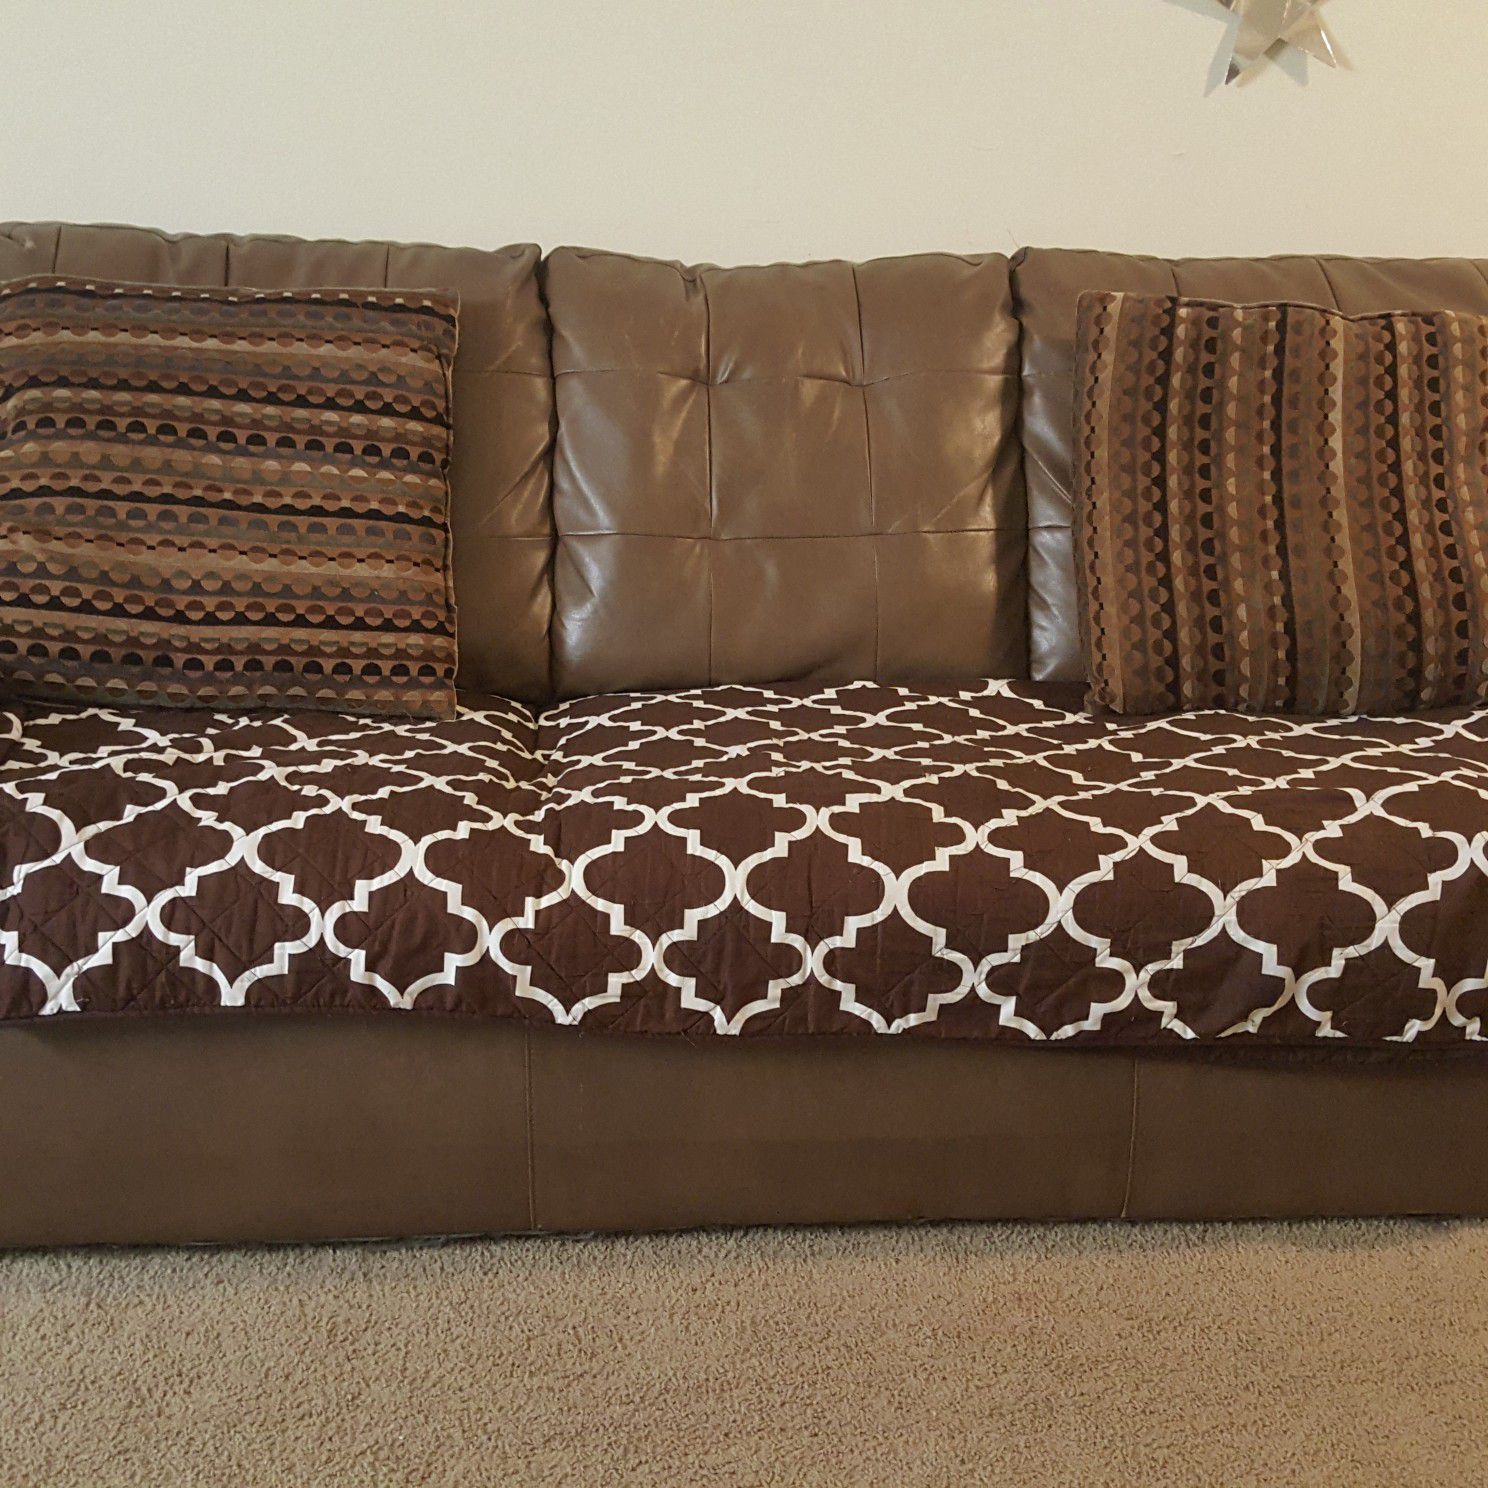 Sofa/couch with pillows